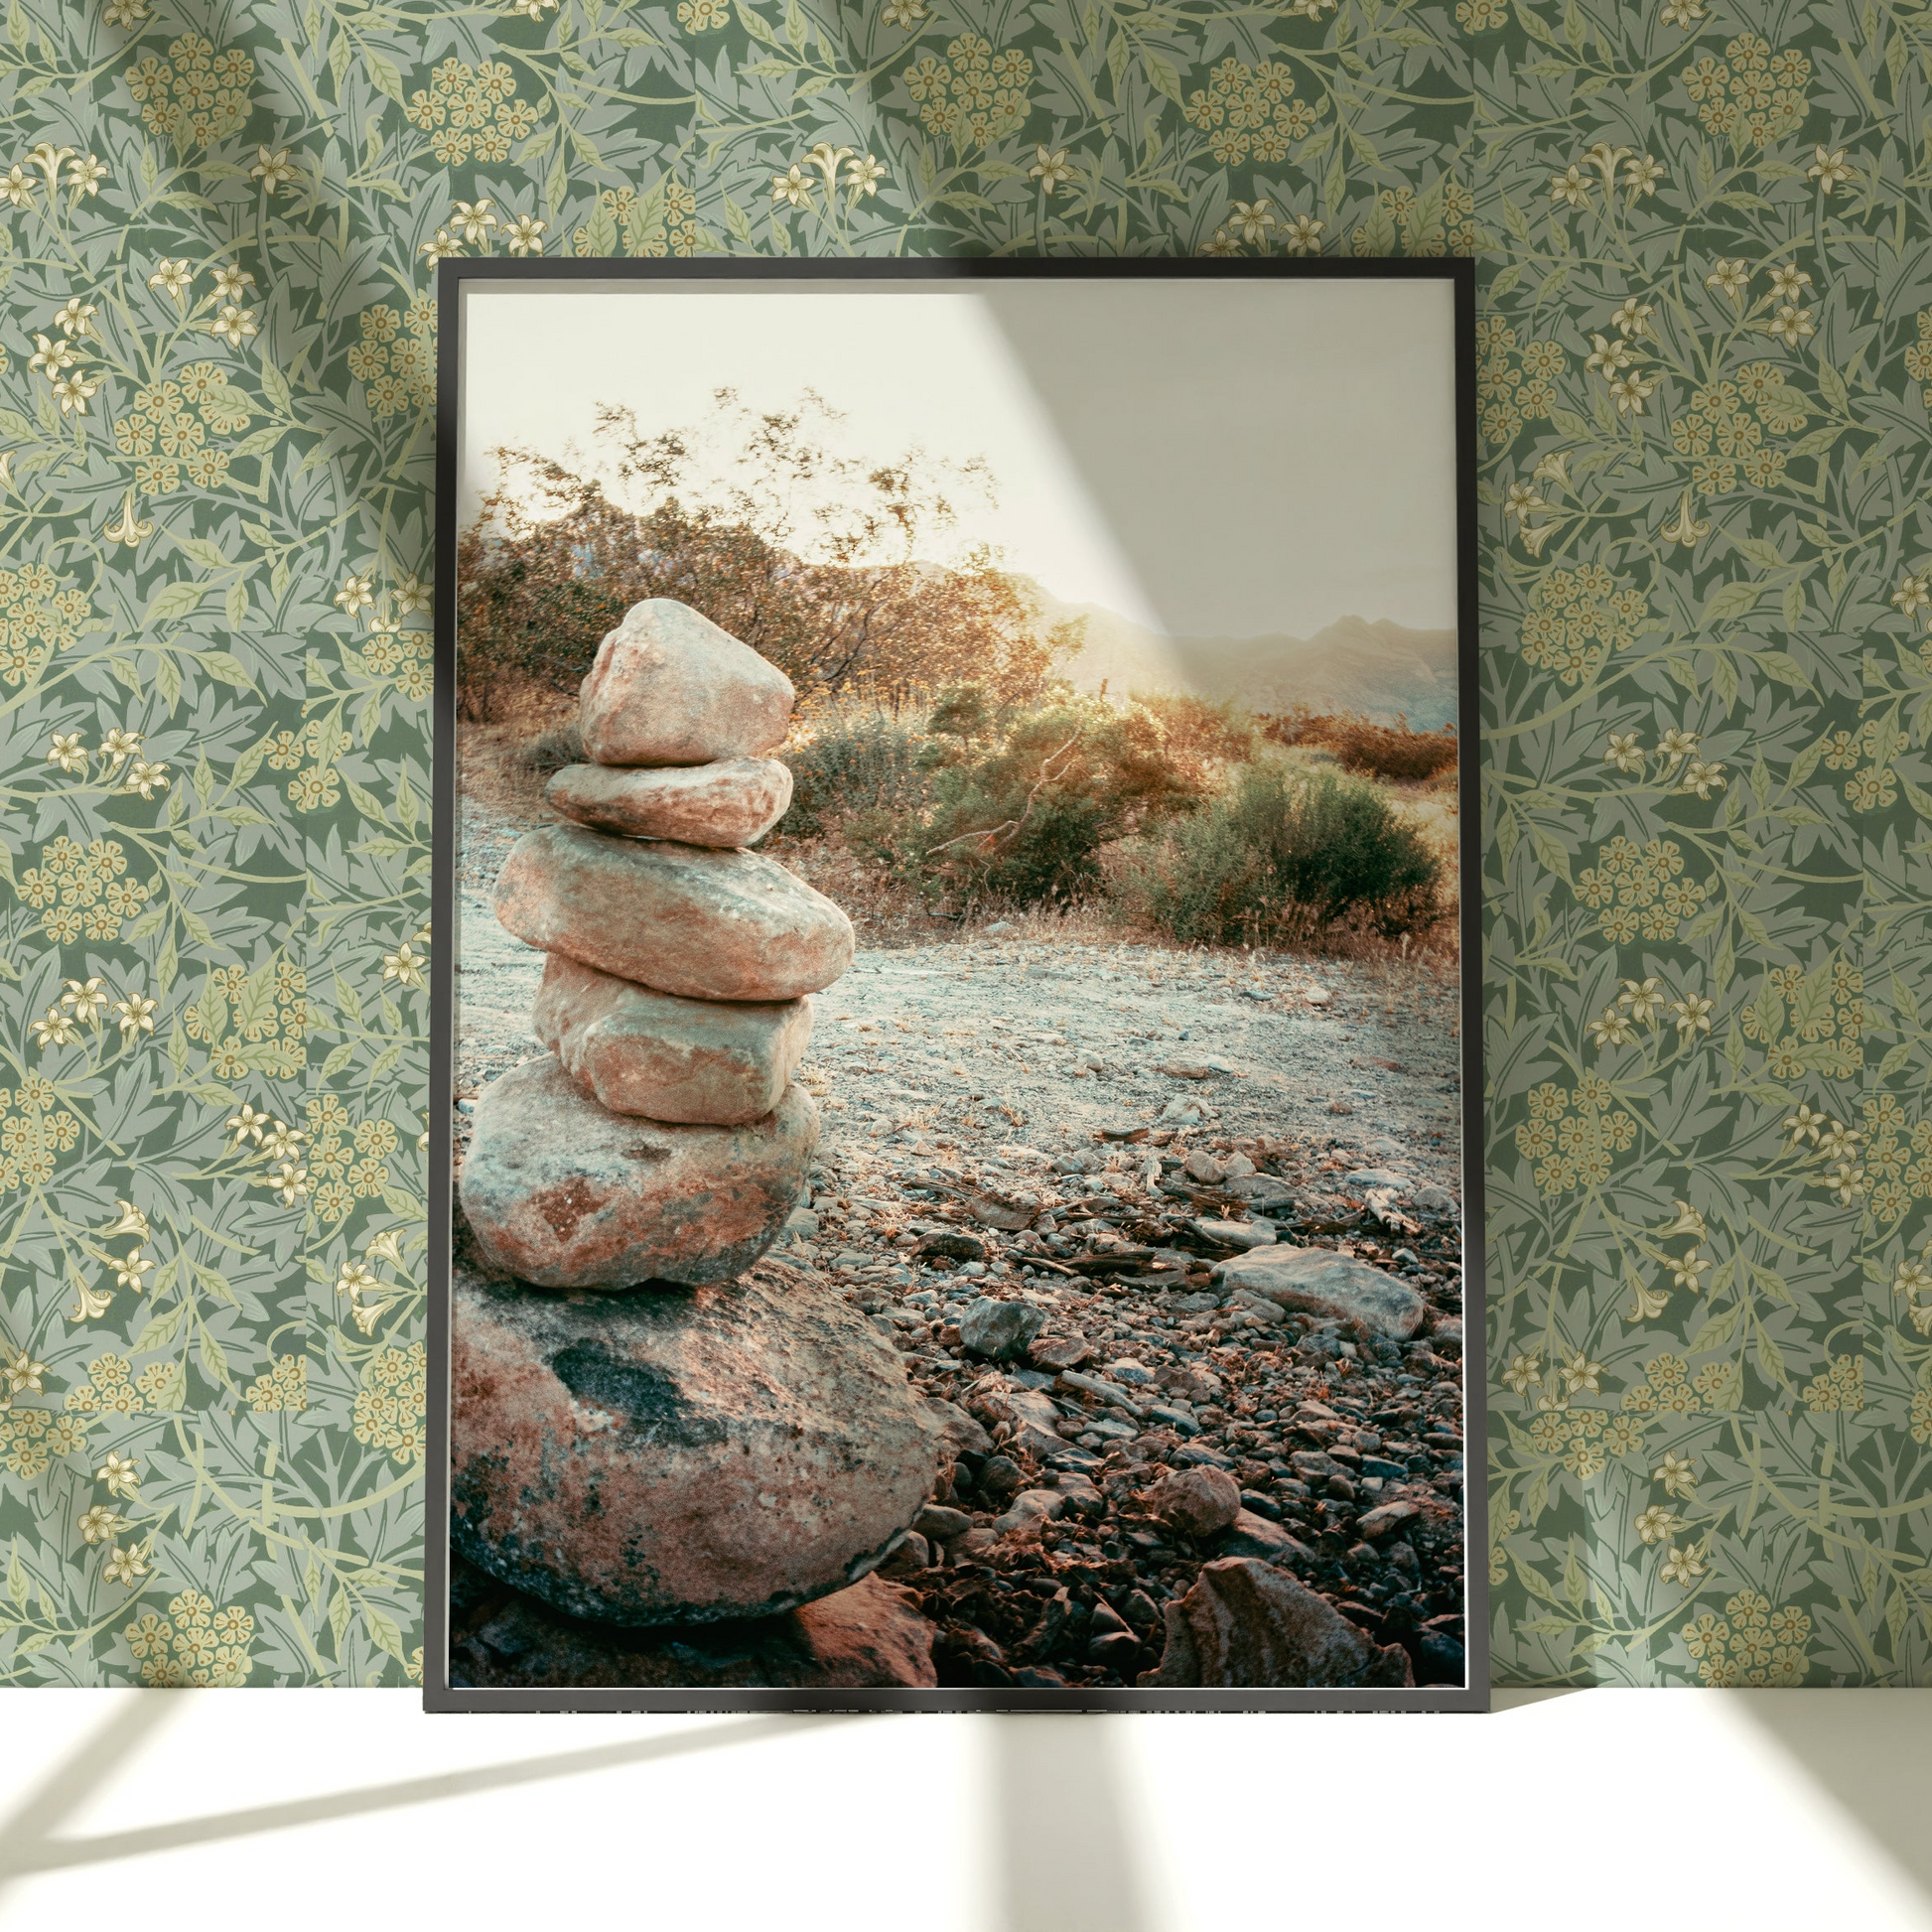 a picture of a pile of rocks on a wall